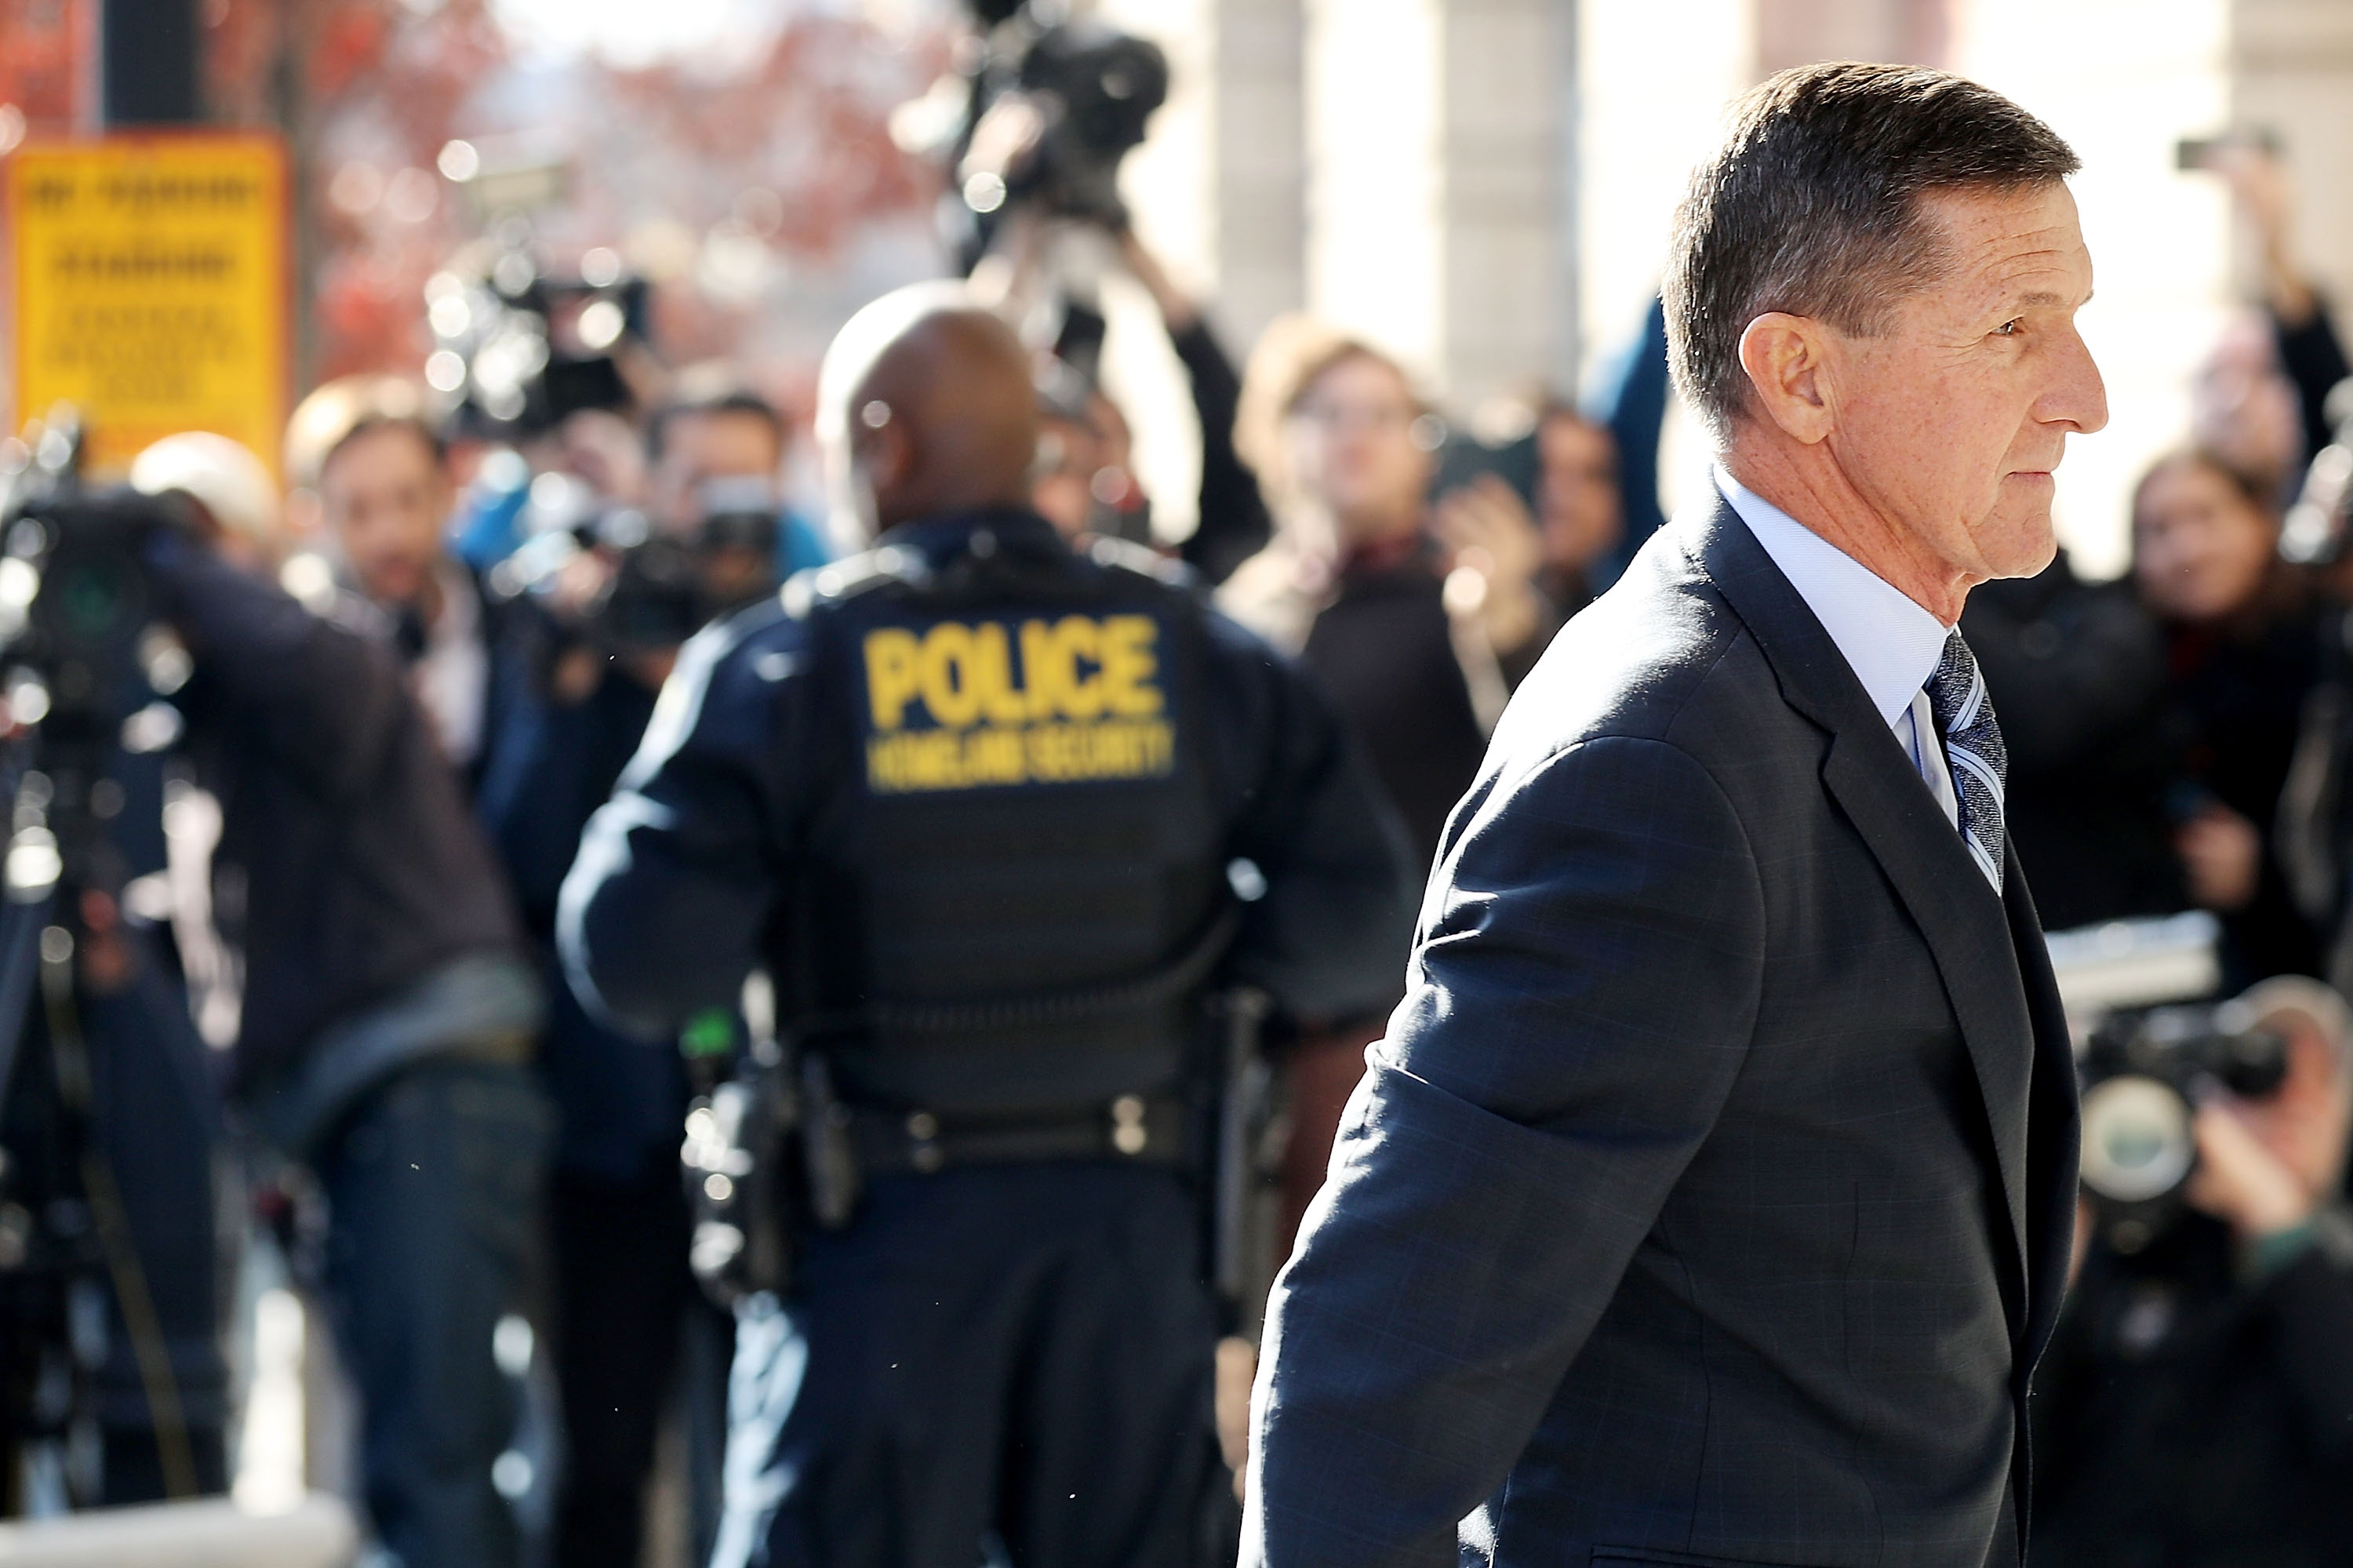 WASHINGTON, DC - DECEMBER 01: Michael Flynn, former national security advisor to President Donald Trump, arrives for his plea hearing at the Prettyman Federal Courthouse December 1, 2017 in Washington, DC. Special Counsel Robert Mueller charged Flynn with one count of making a false statement to the FBI. (Photo by Chip Somodevilla/Getty Images)